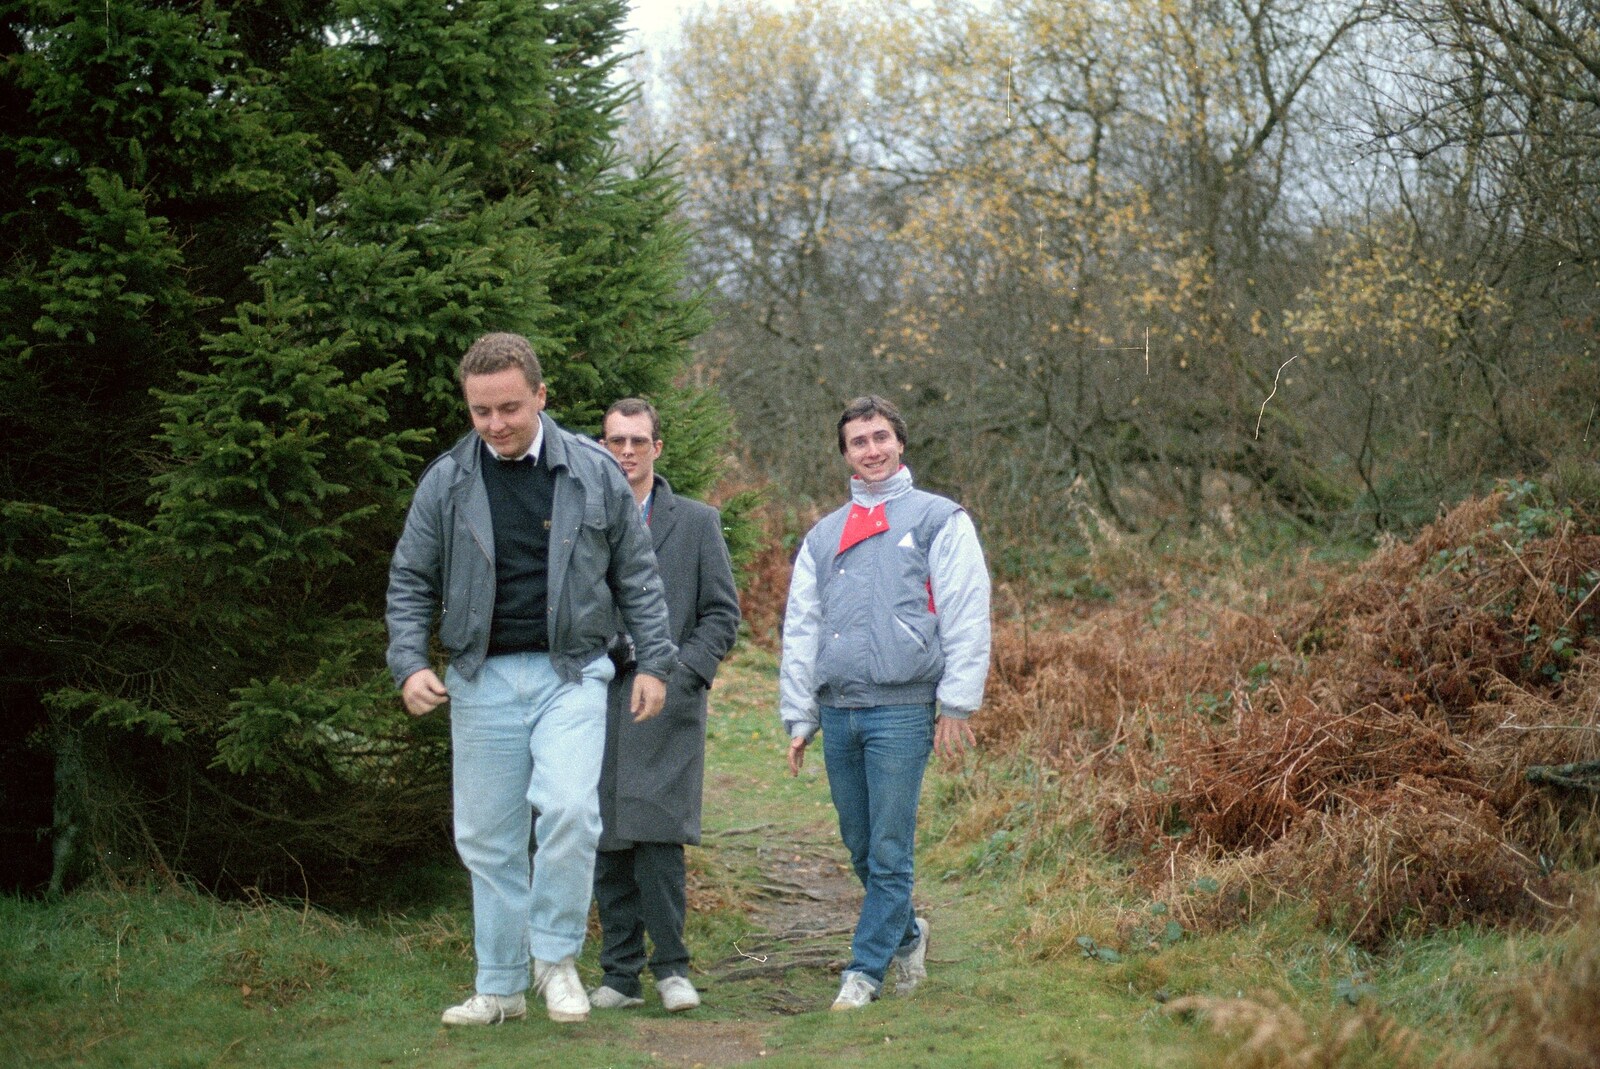 Andy Bray, Chris Beard and Riki Stewart from Uni: A Trip to Venford Resevoir, Dartmoor, Devon - 18th January 1987